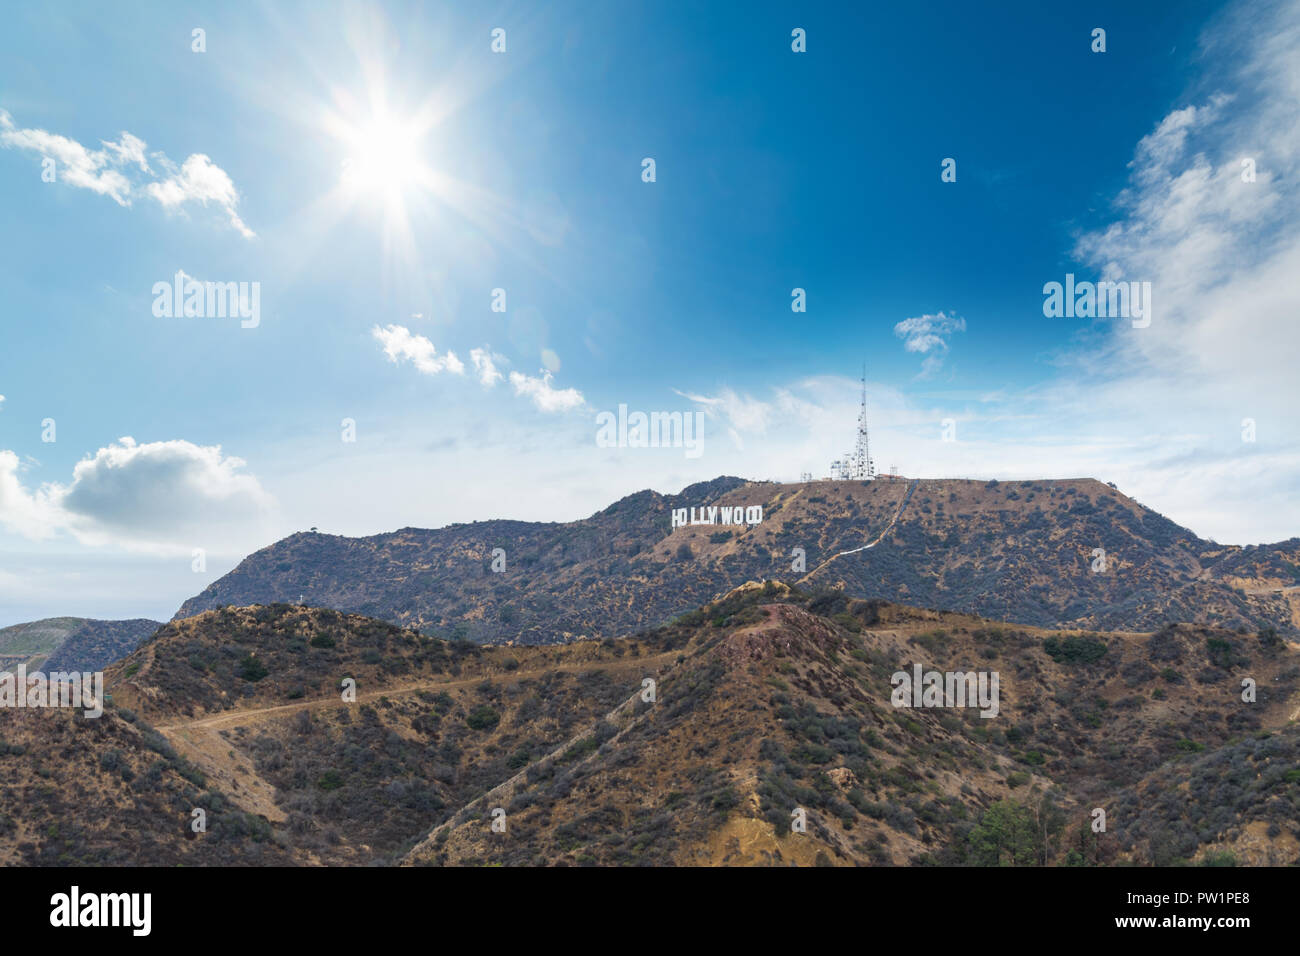 Los Angeles, CA, USA - October 28, 2016. World famous Hollywood sign under clouds Stock Photo